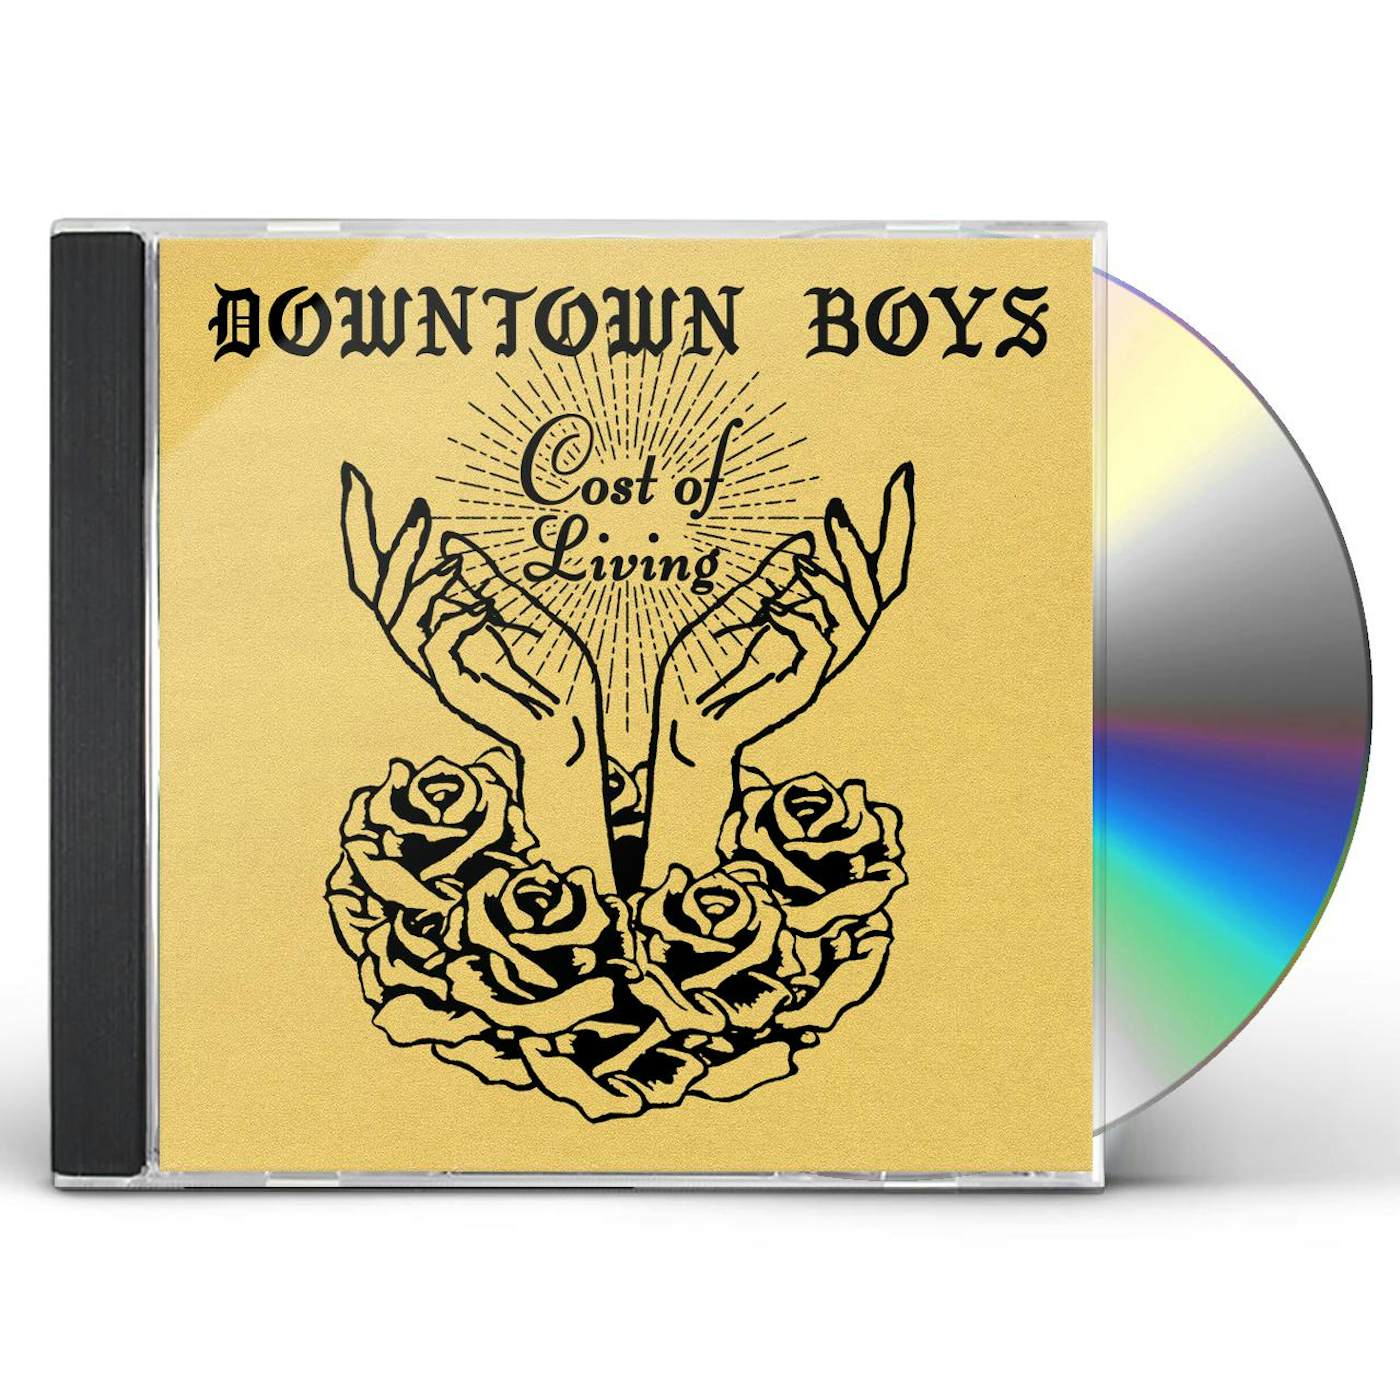 Downtown Boys COST OF LIVING CD